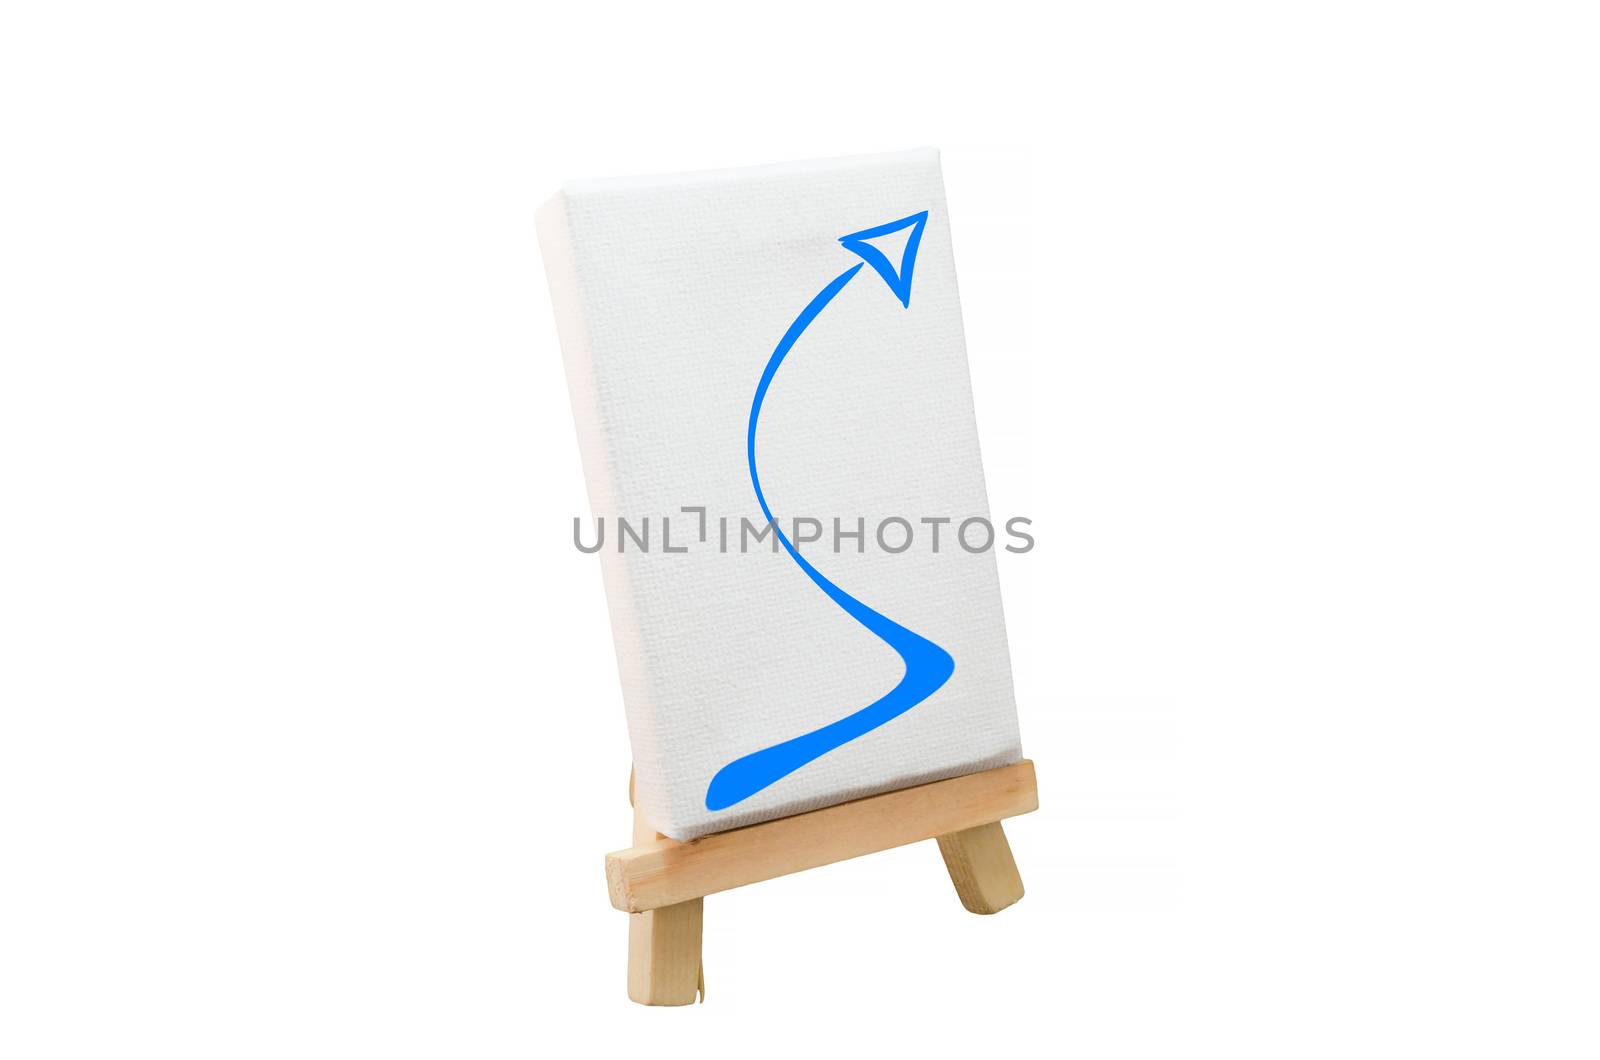 Miniature artist easel, isolated on white with a blue arrow.